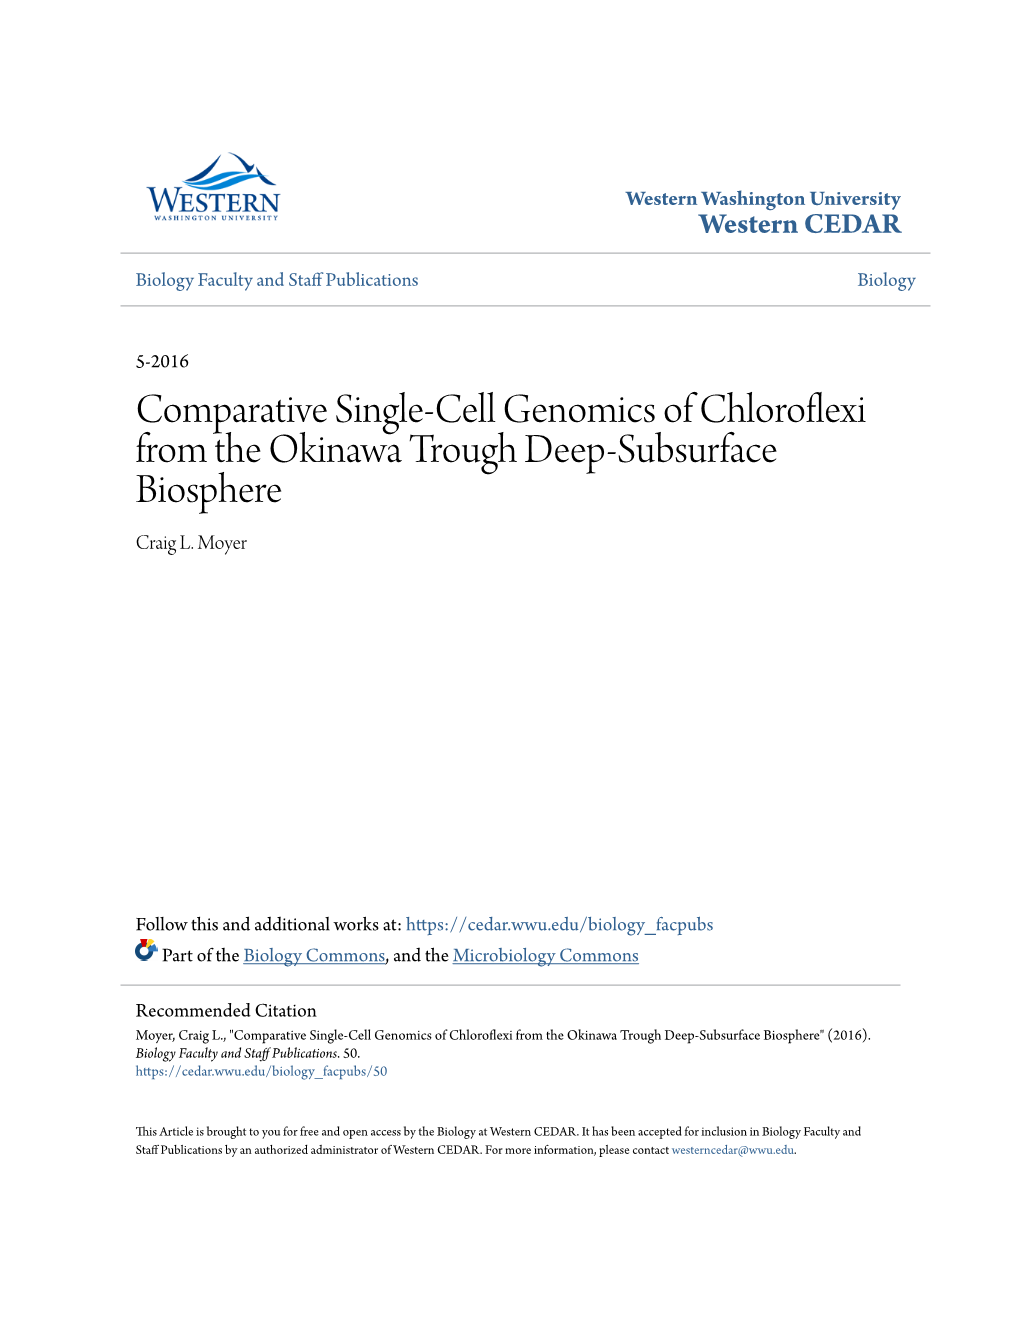 Comparative Single-Cell Genomics of Chloroflexi from the Okinawa Trough Deep-Subsurface Biosphere Craig L